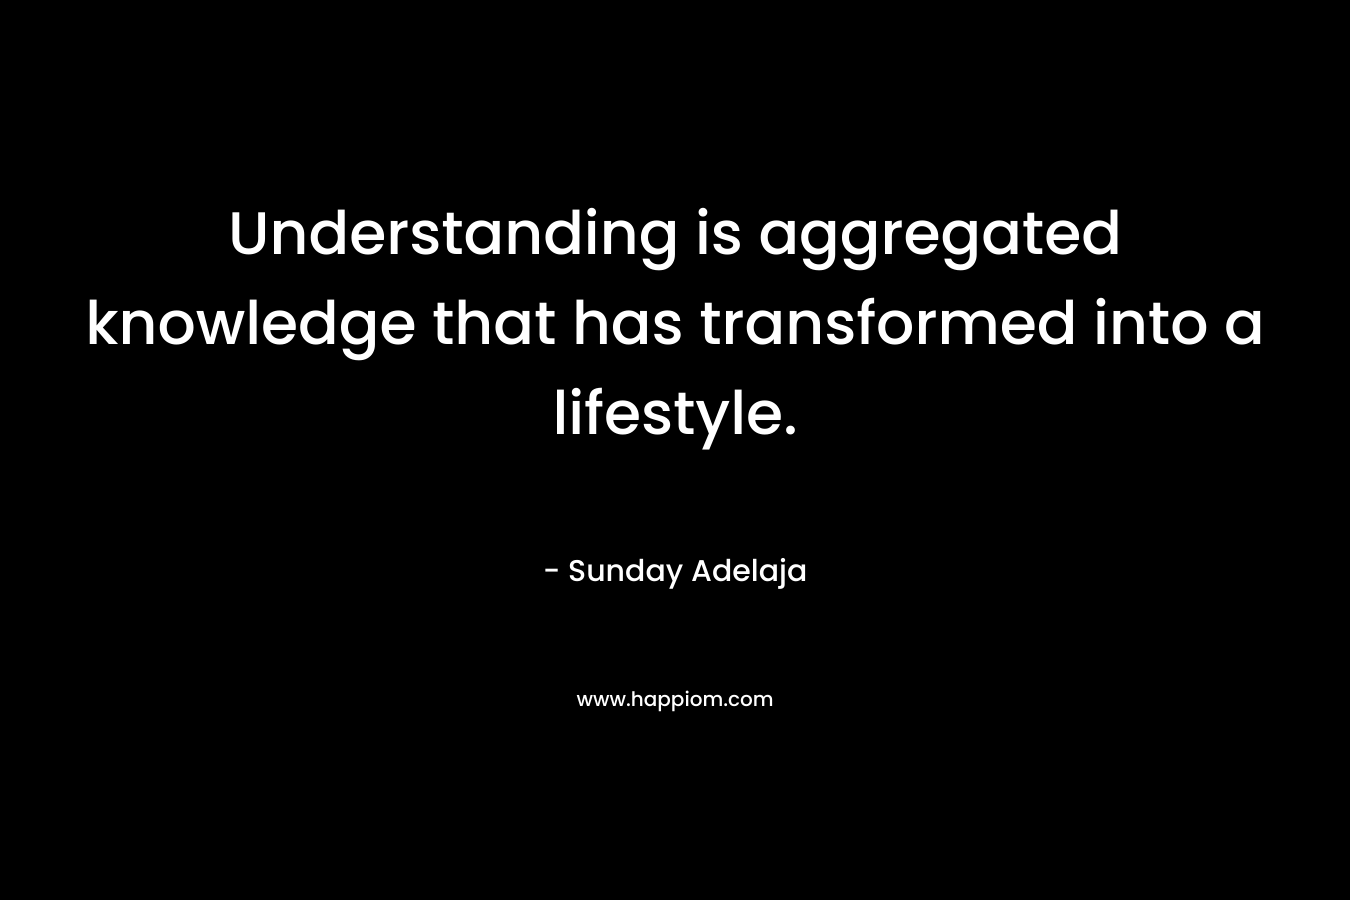 Understanding is aggregated knowledge that has transformed into a lifestyle. – Sunday Adelaja